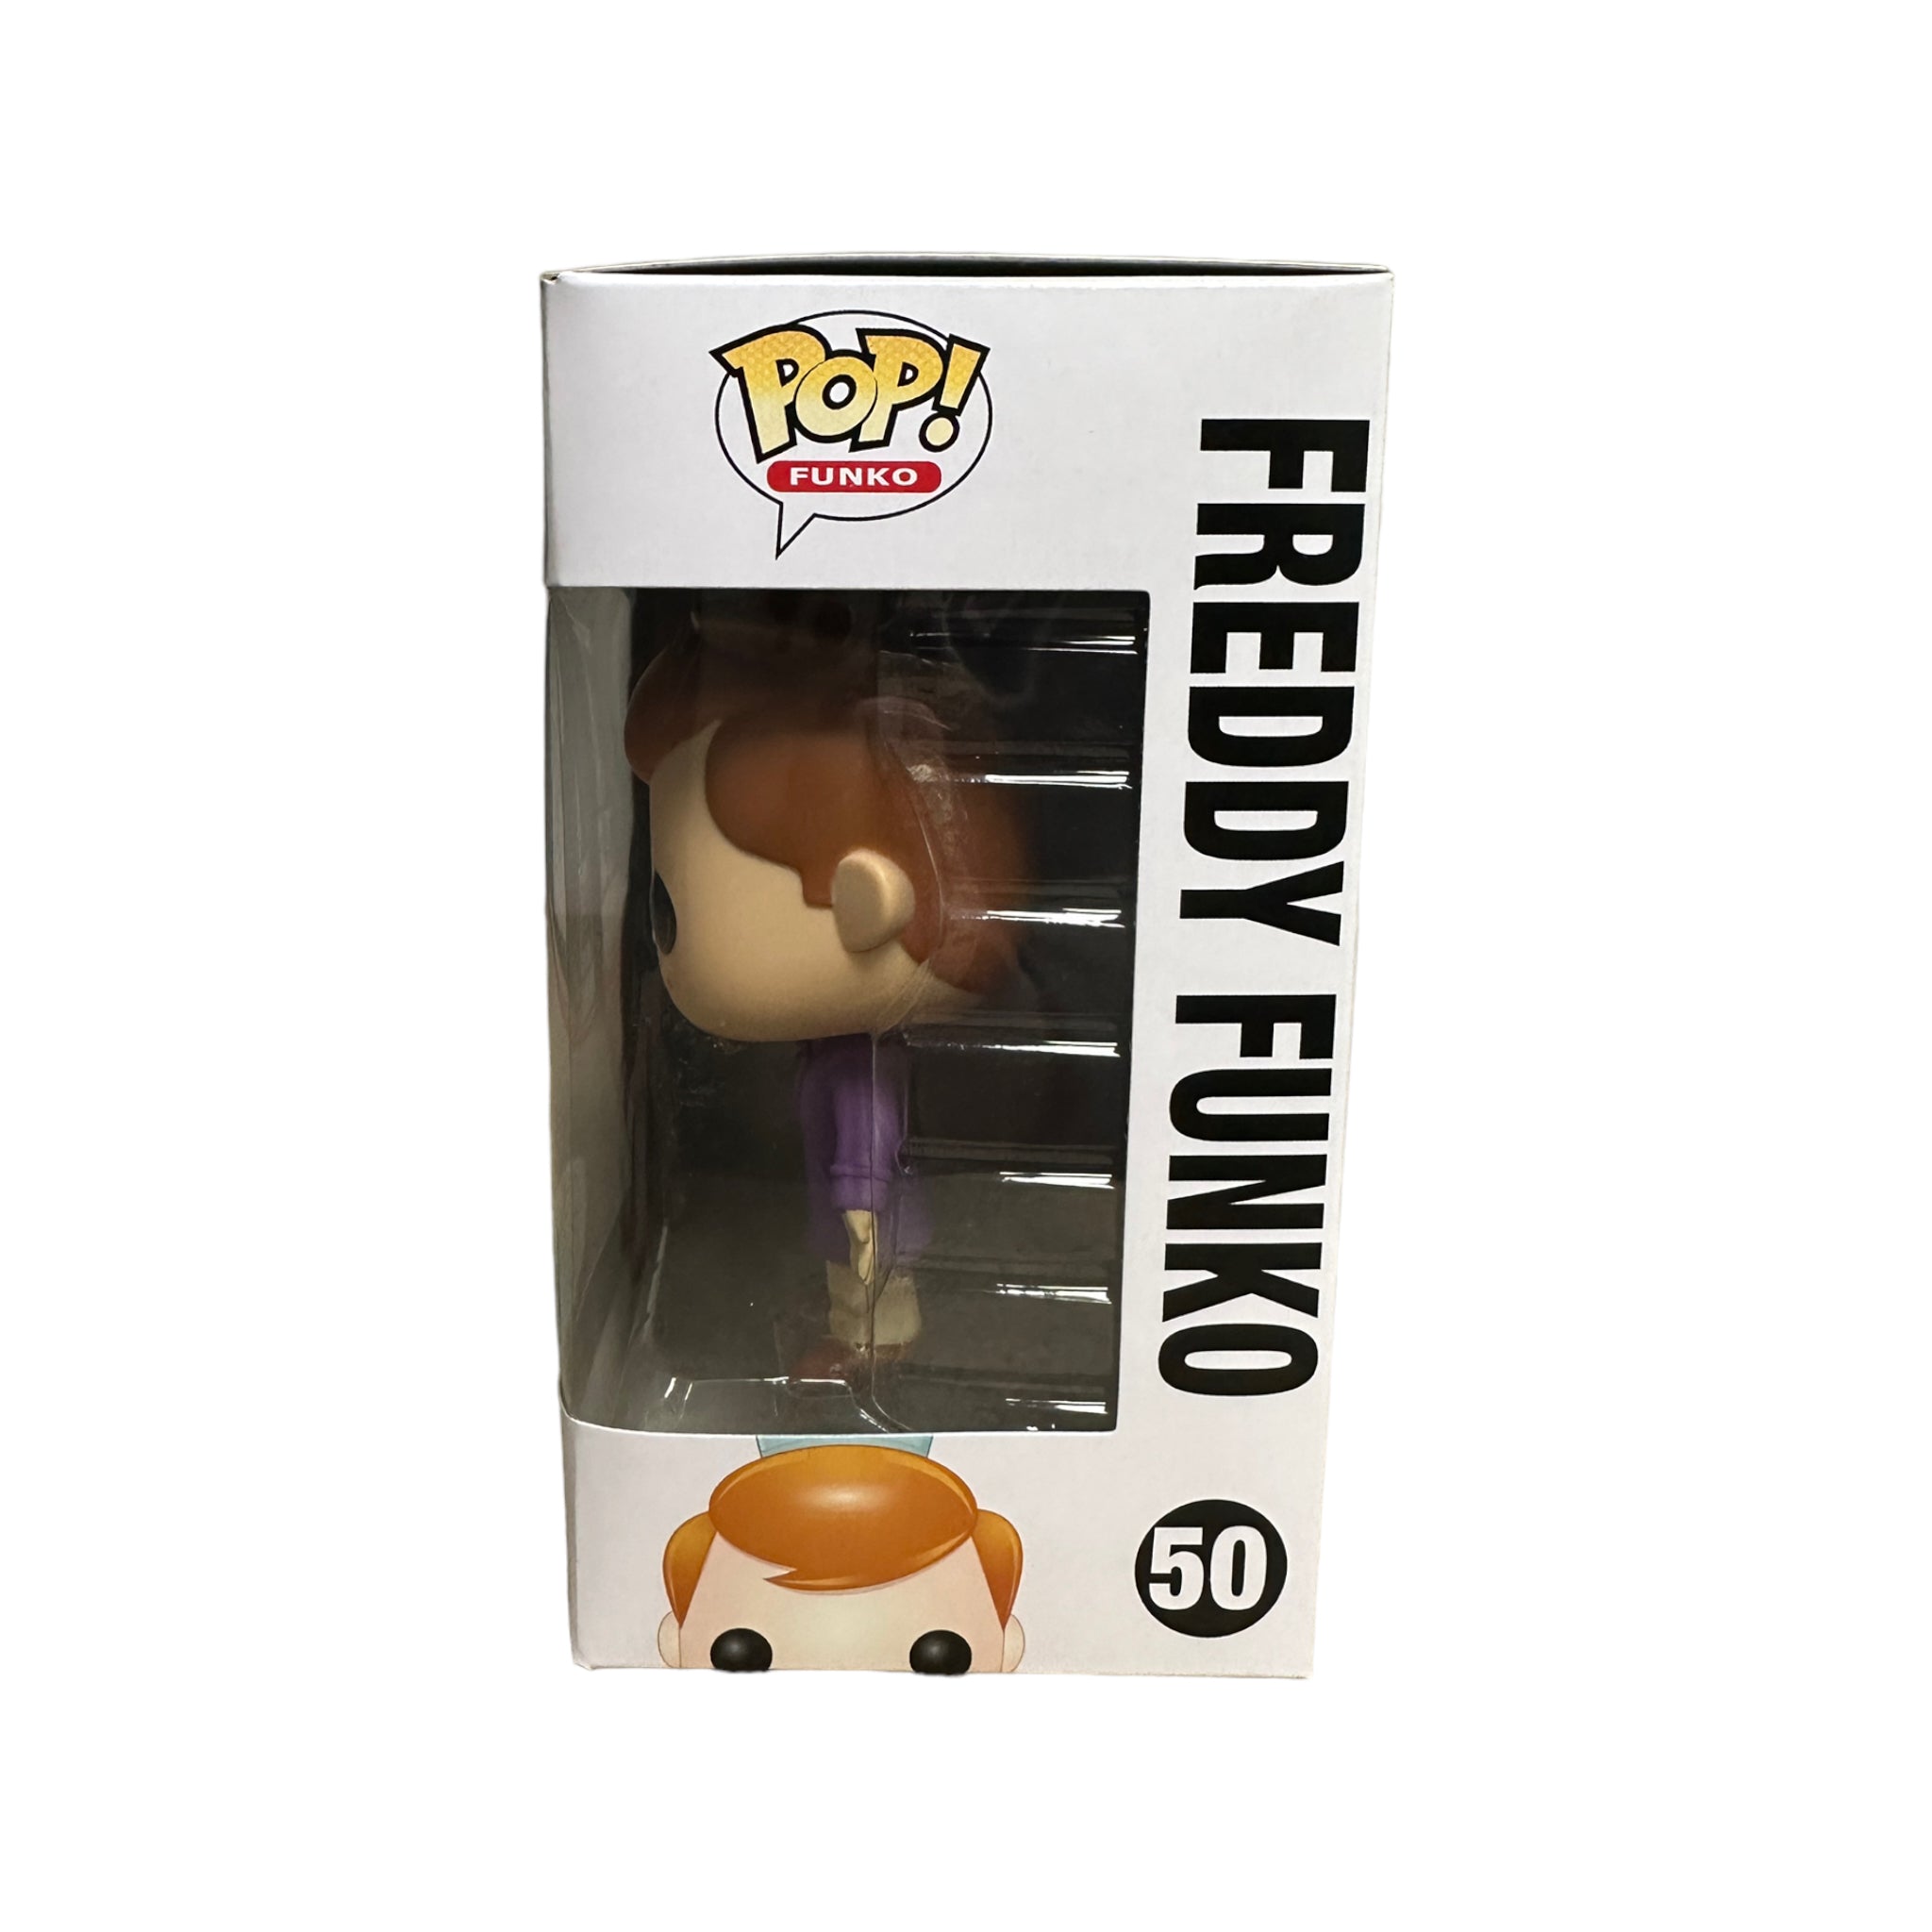 Freddy Funko as Willy Wonka #50 Funko Pop! - SDCC 2016 Exclusive LE500 Pcs - Condition 8.75/10